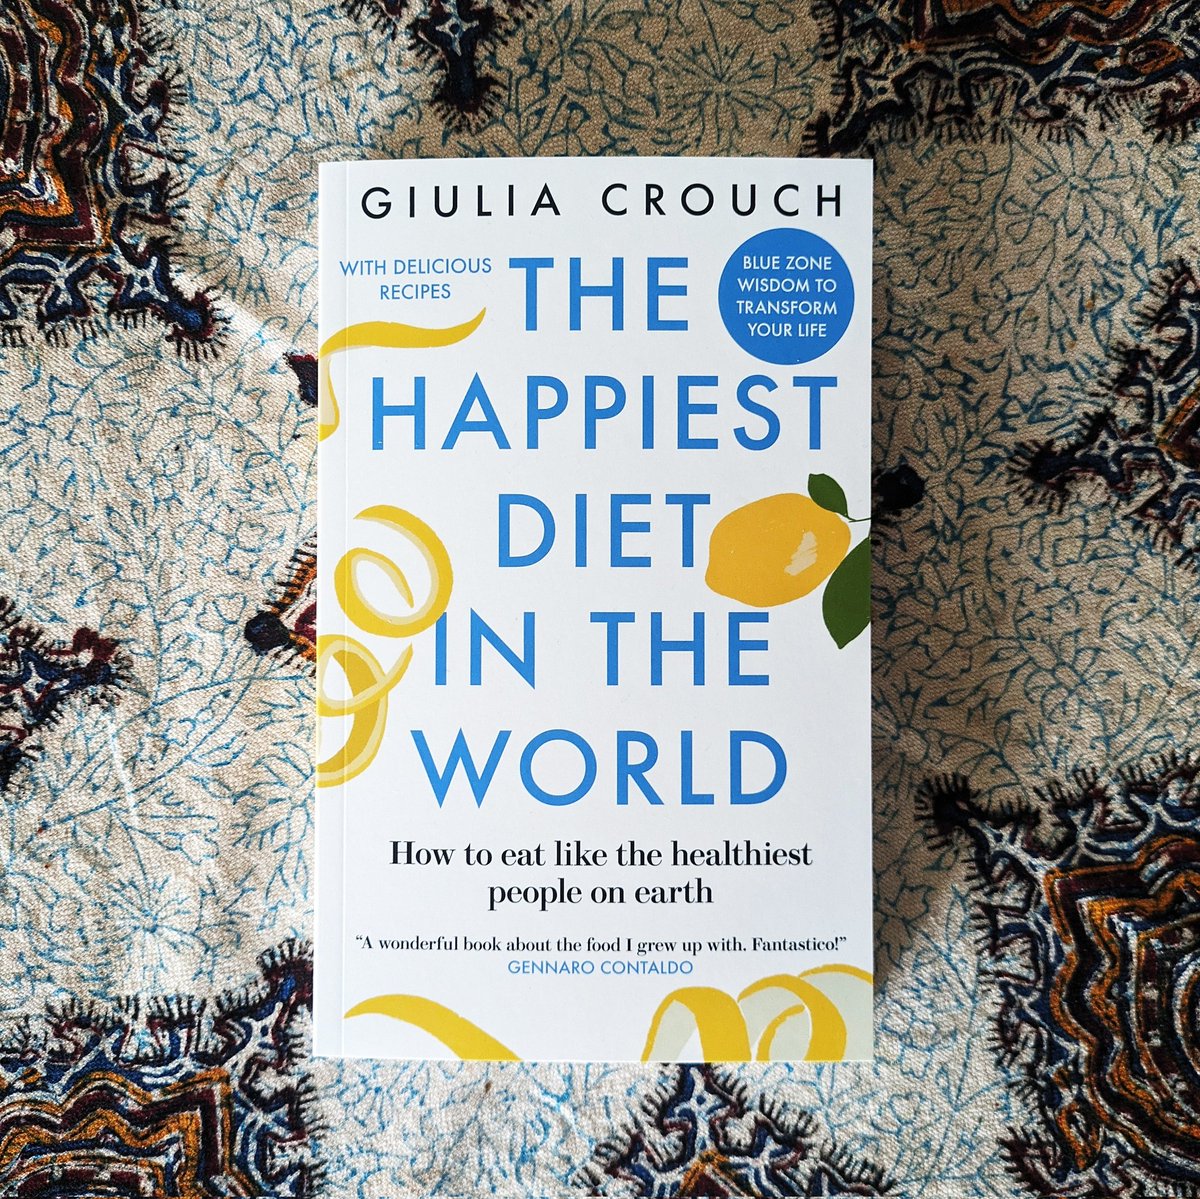 Just got my copy of @GiuliaCrouch's The Happiest Diet in the World, so I fully expect to be well fed into my 100s, you should too.